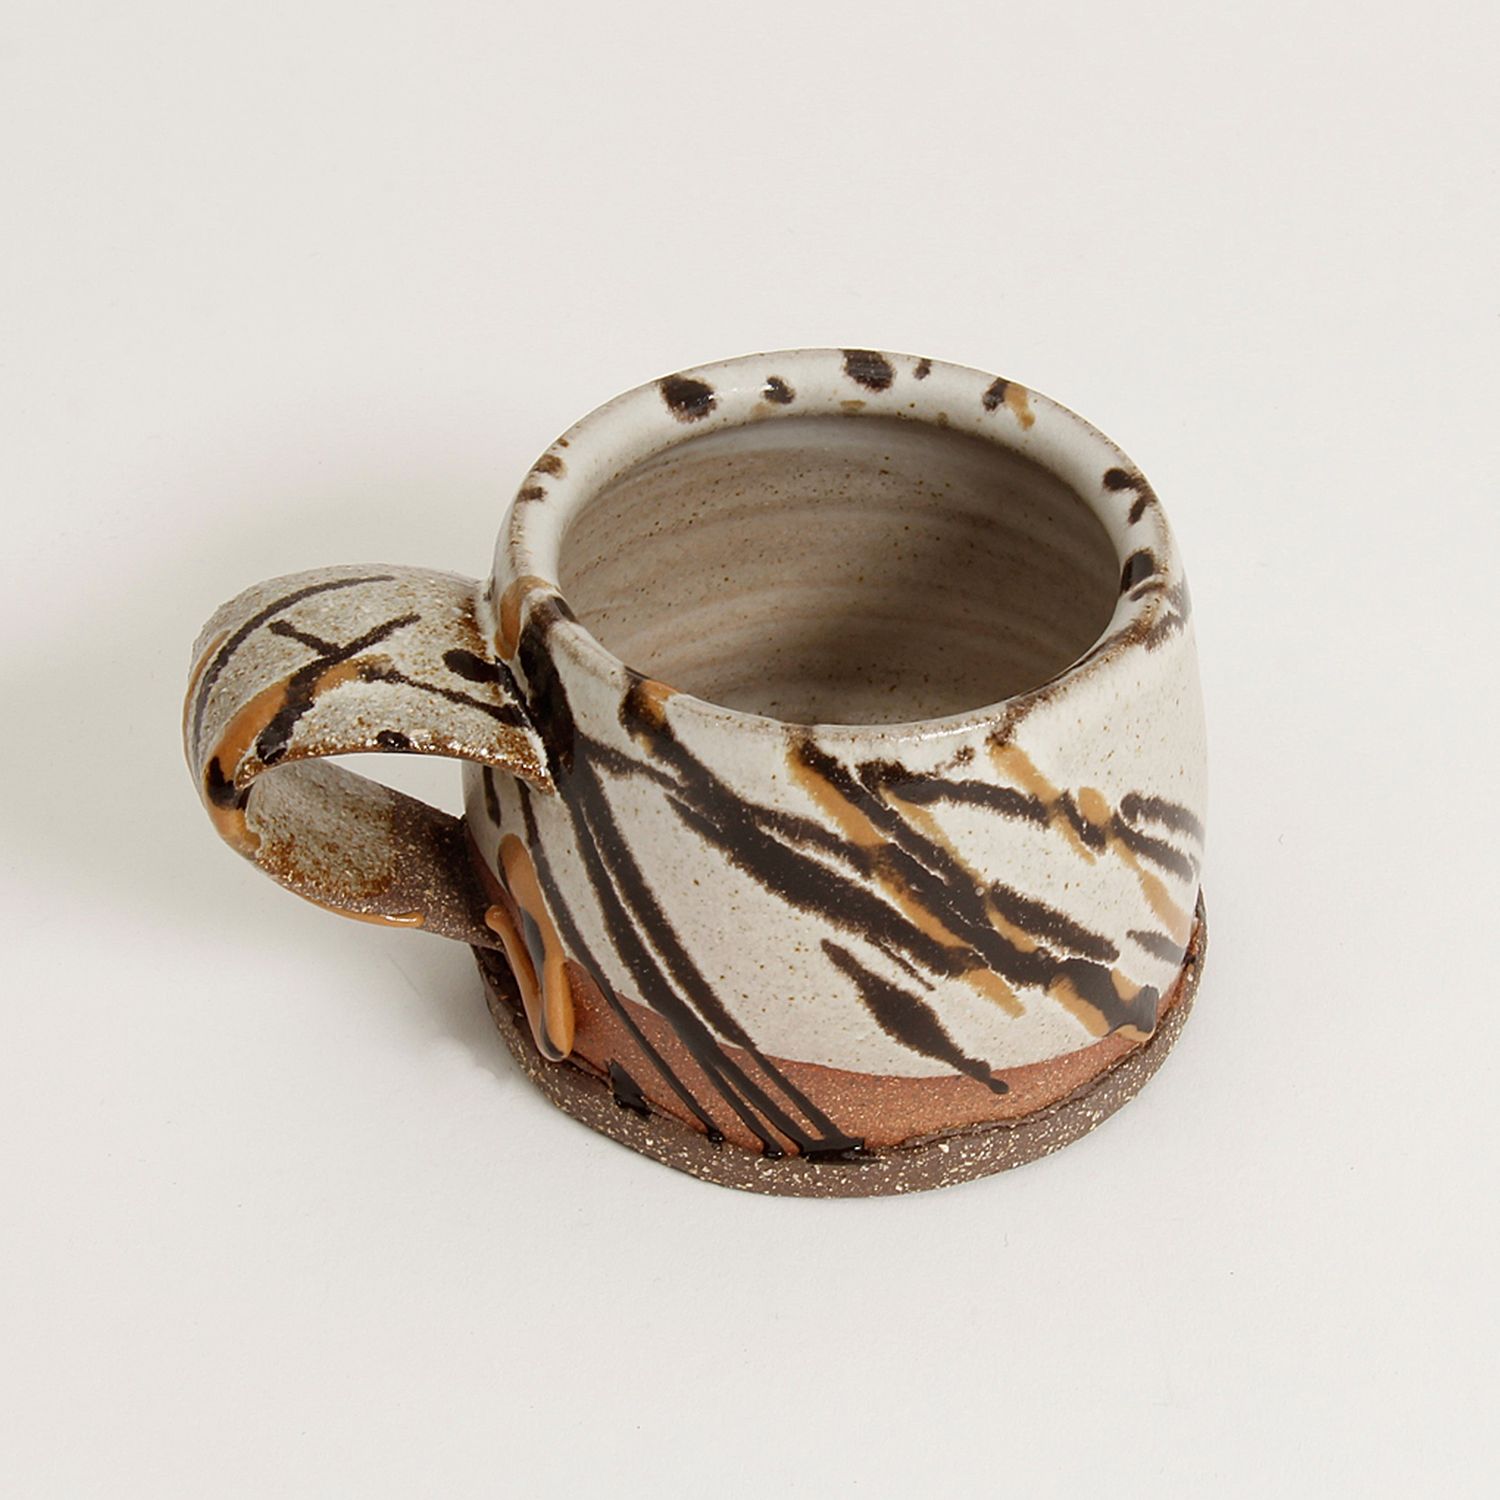 Gracia Isabel Gomez: Espresso mug in Brown Chocolate Product Image 6 of 6